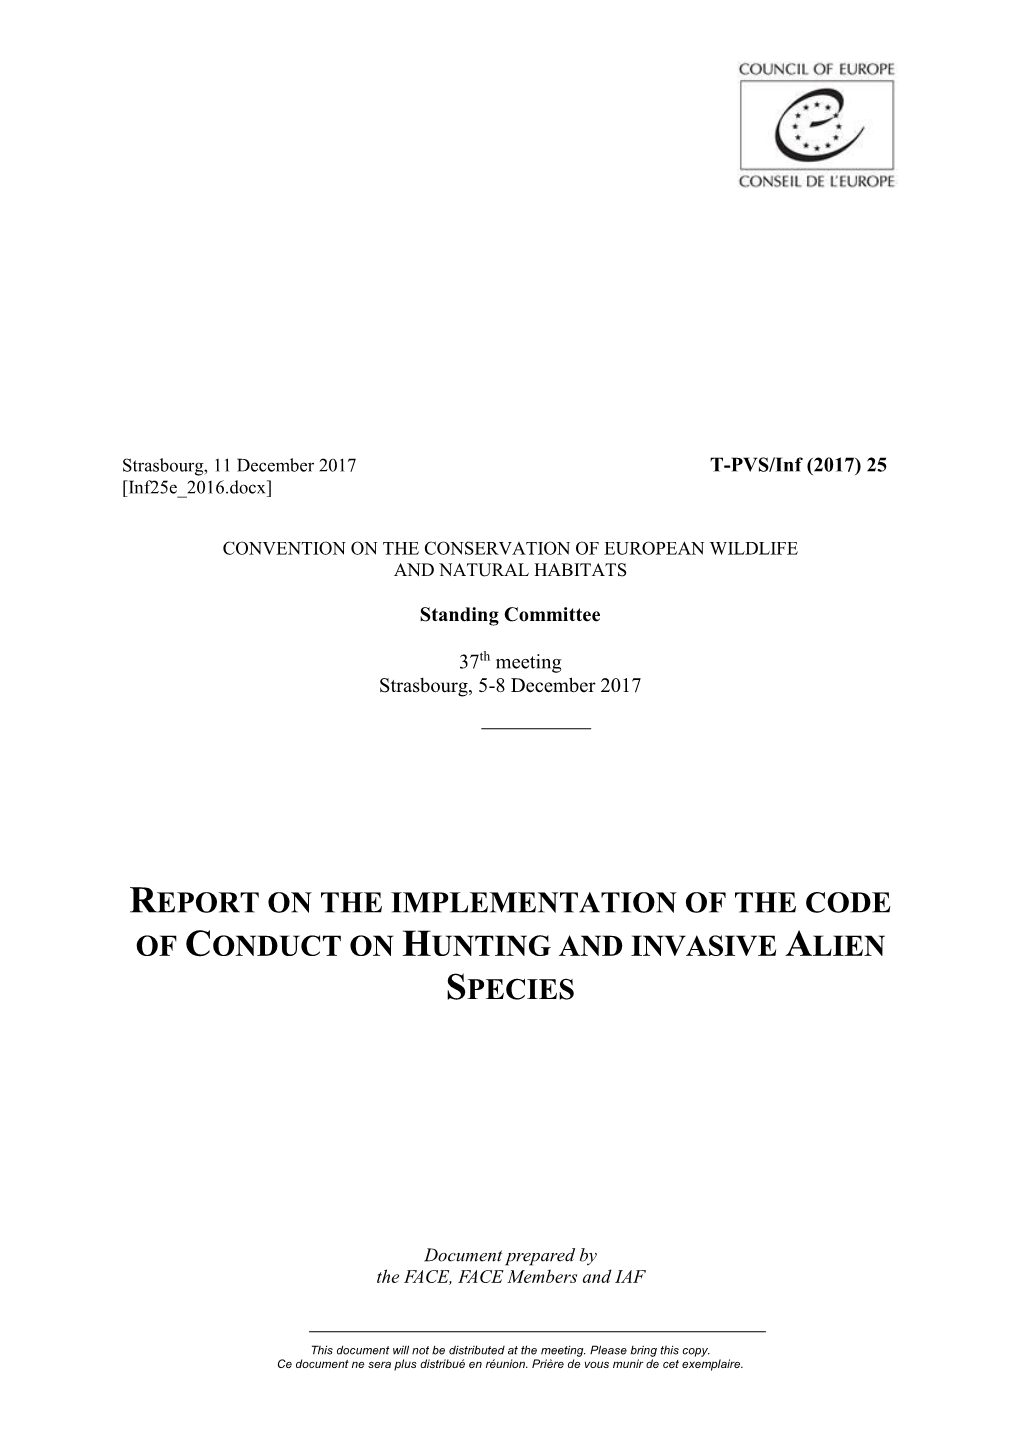 Report on Implementation of the Code of Conduct on Hunting And